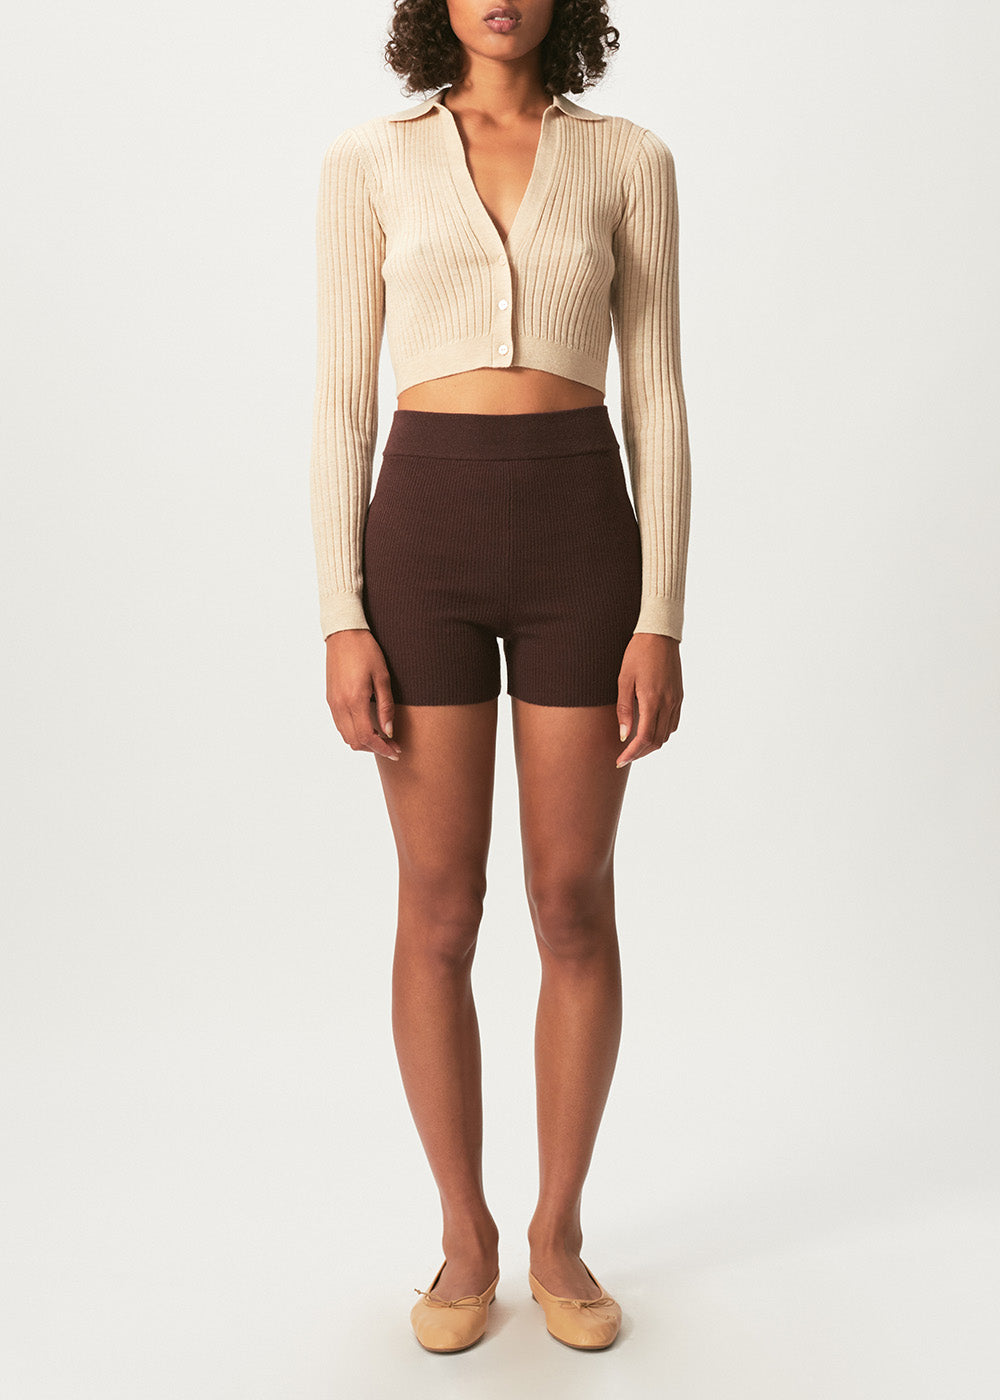 Callen Cropped Cardigan - Small / Dune